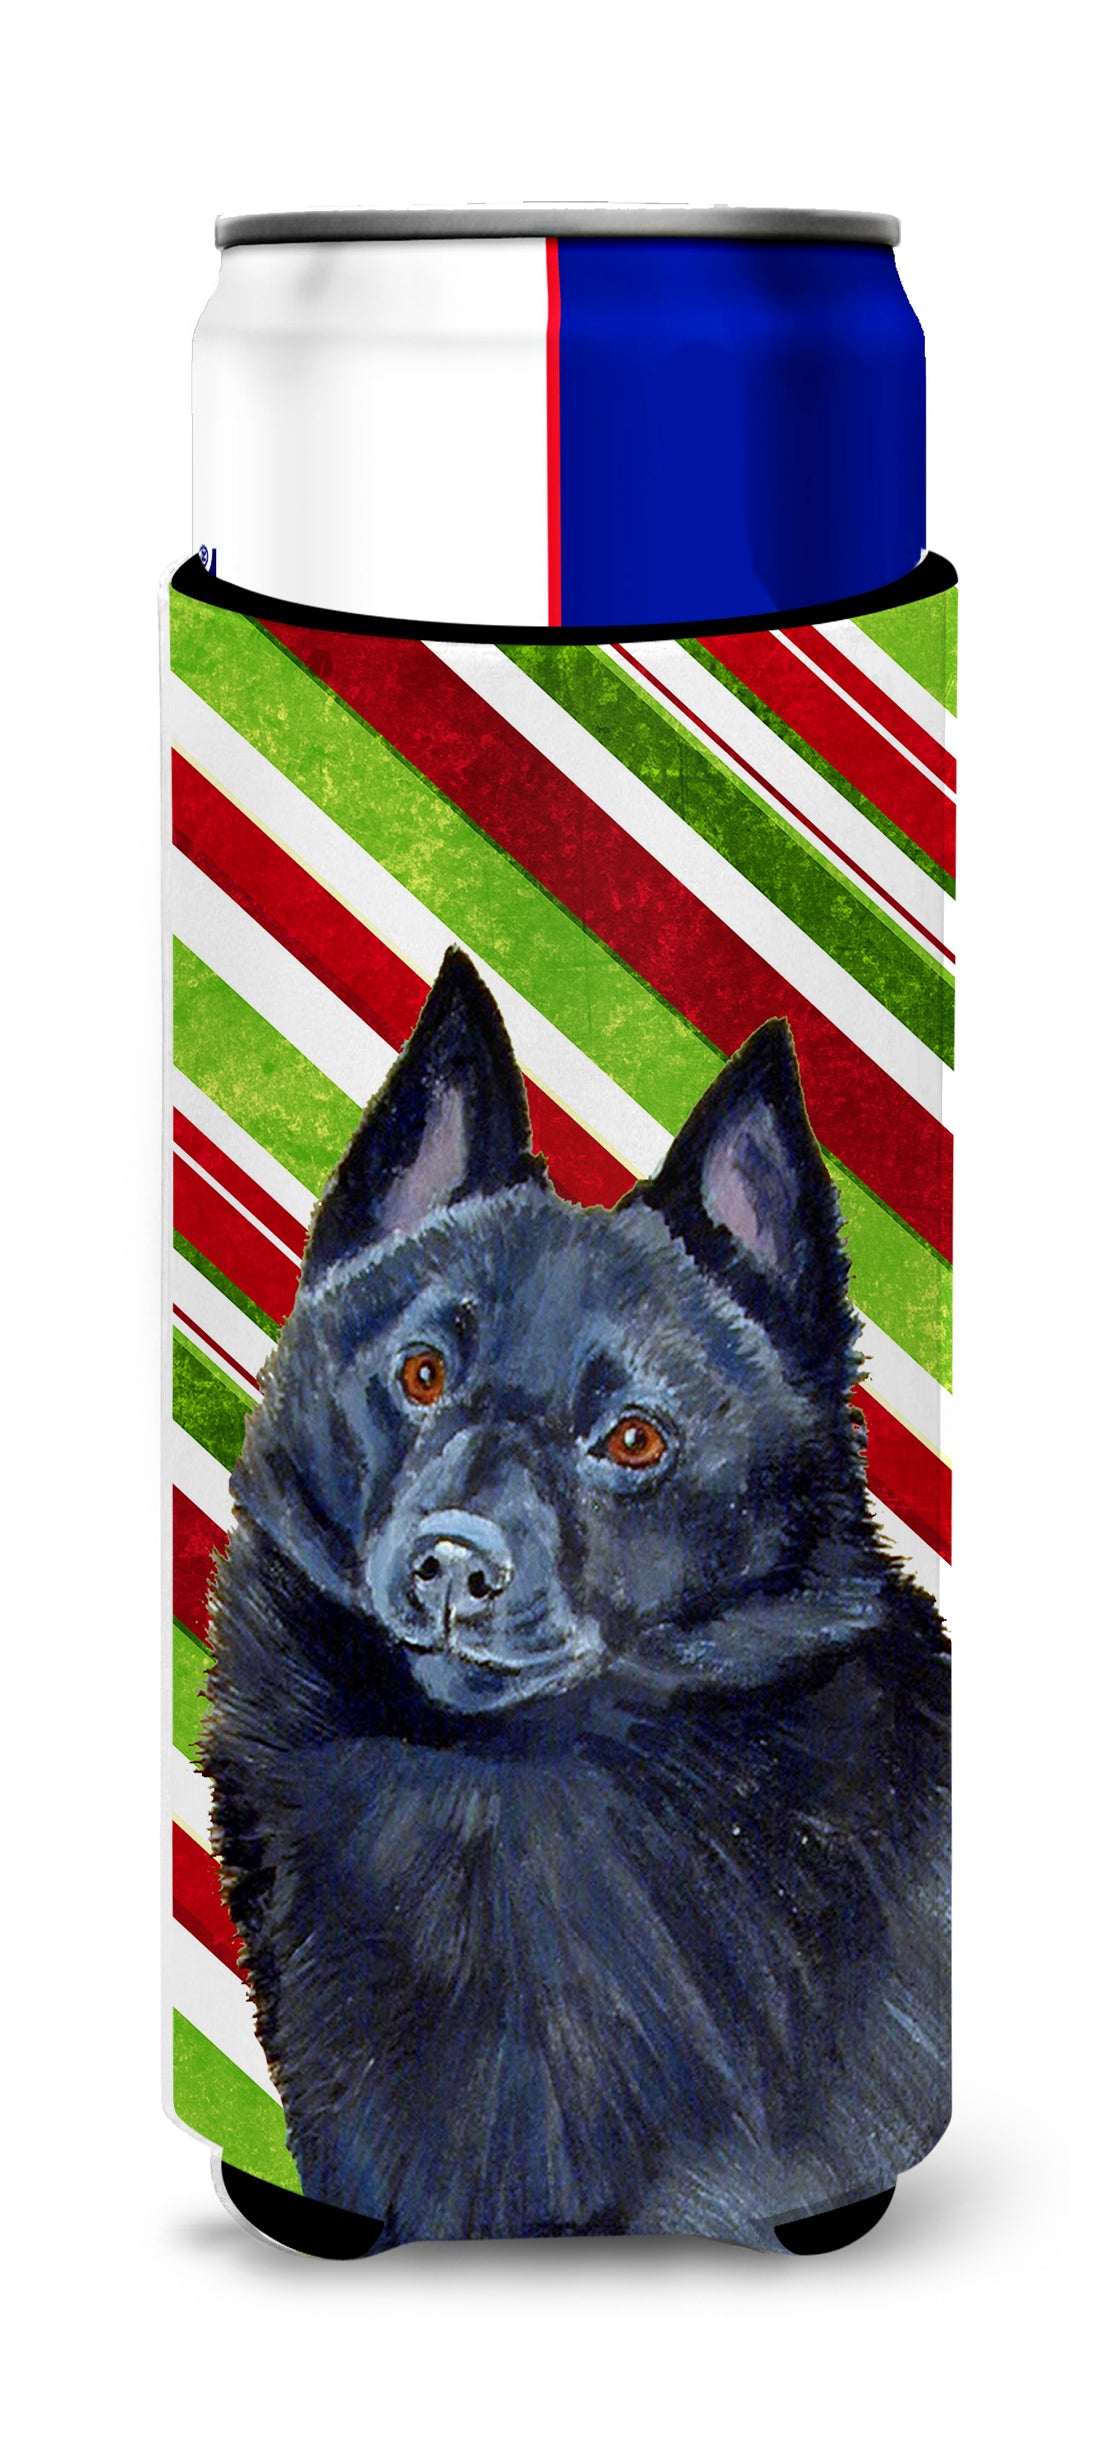 Schipperke Candy Cane Holiday Christmas Ultra Beverage Insulators for slim cans LH9249MUK.